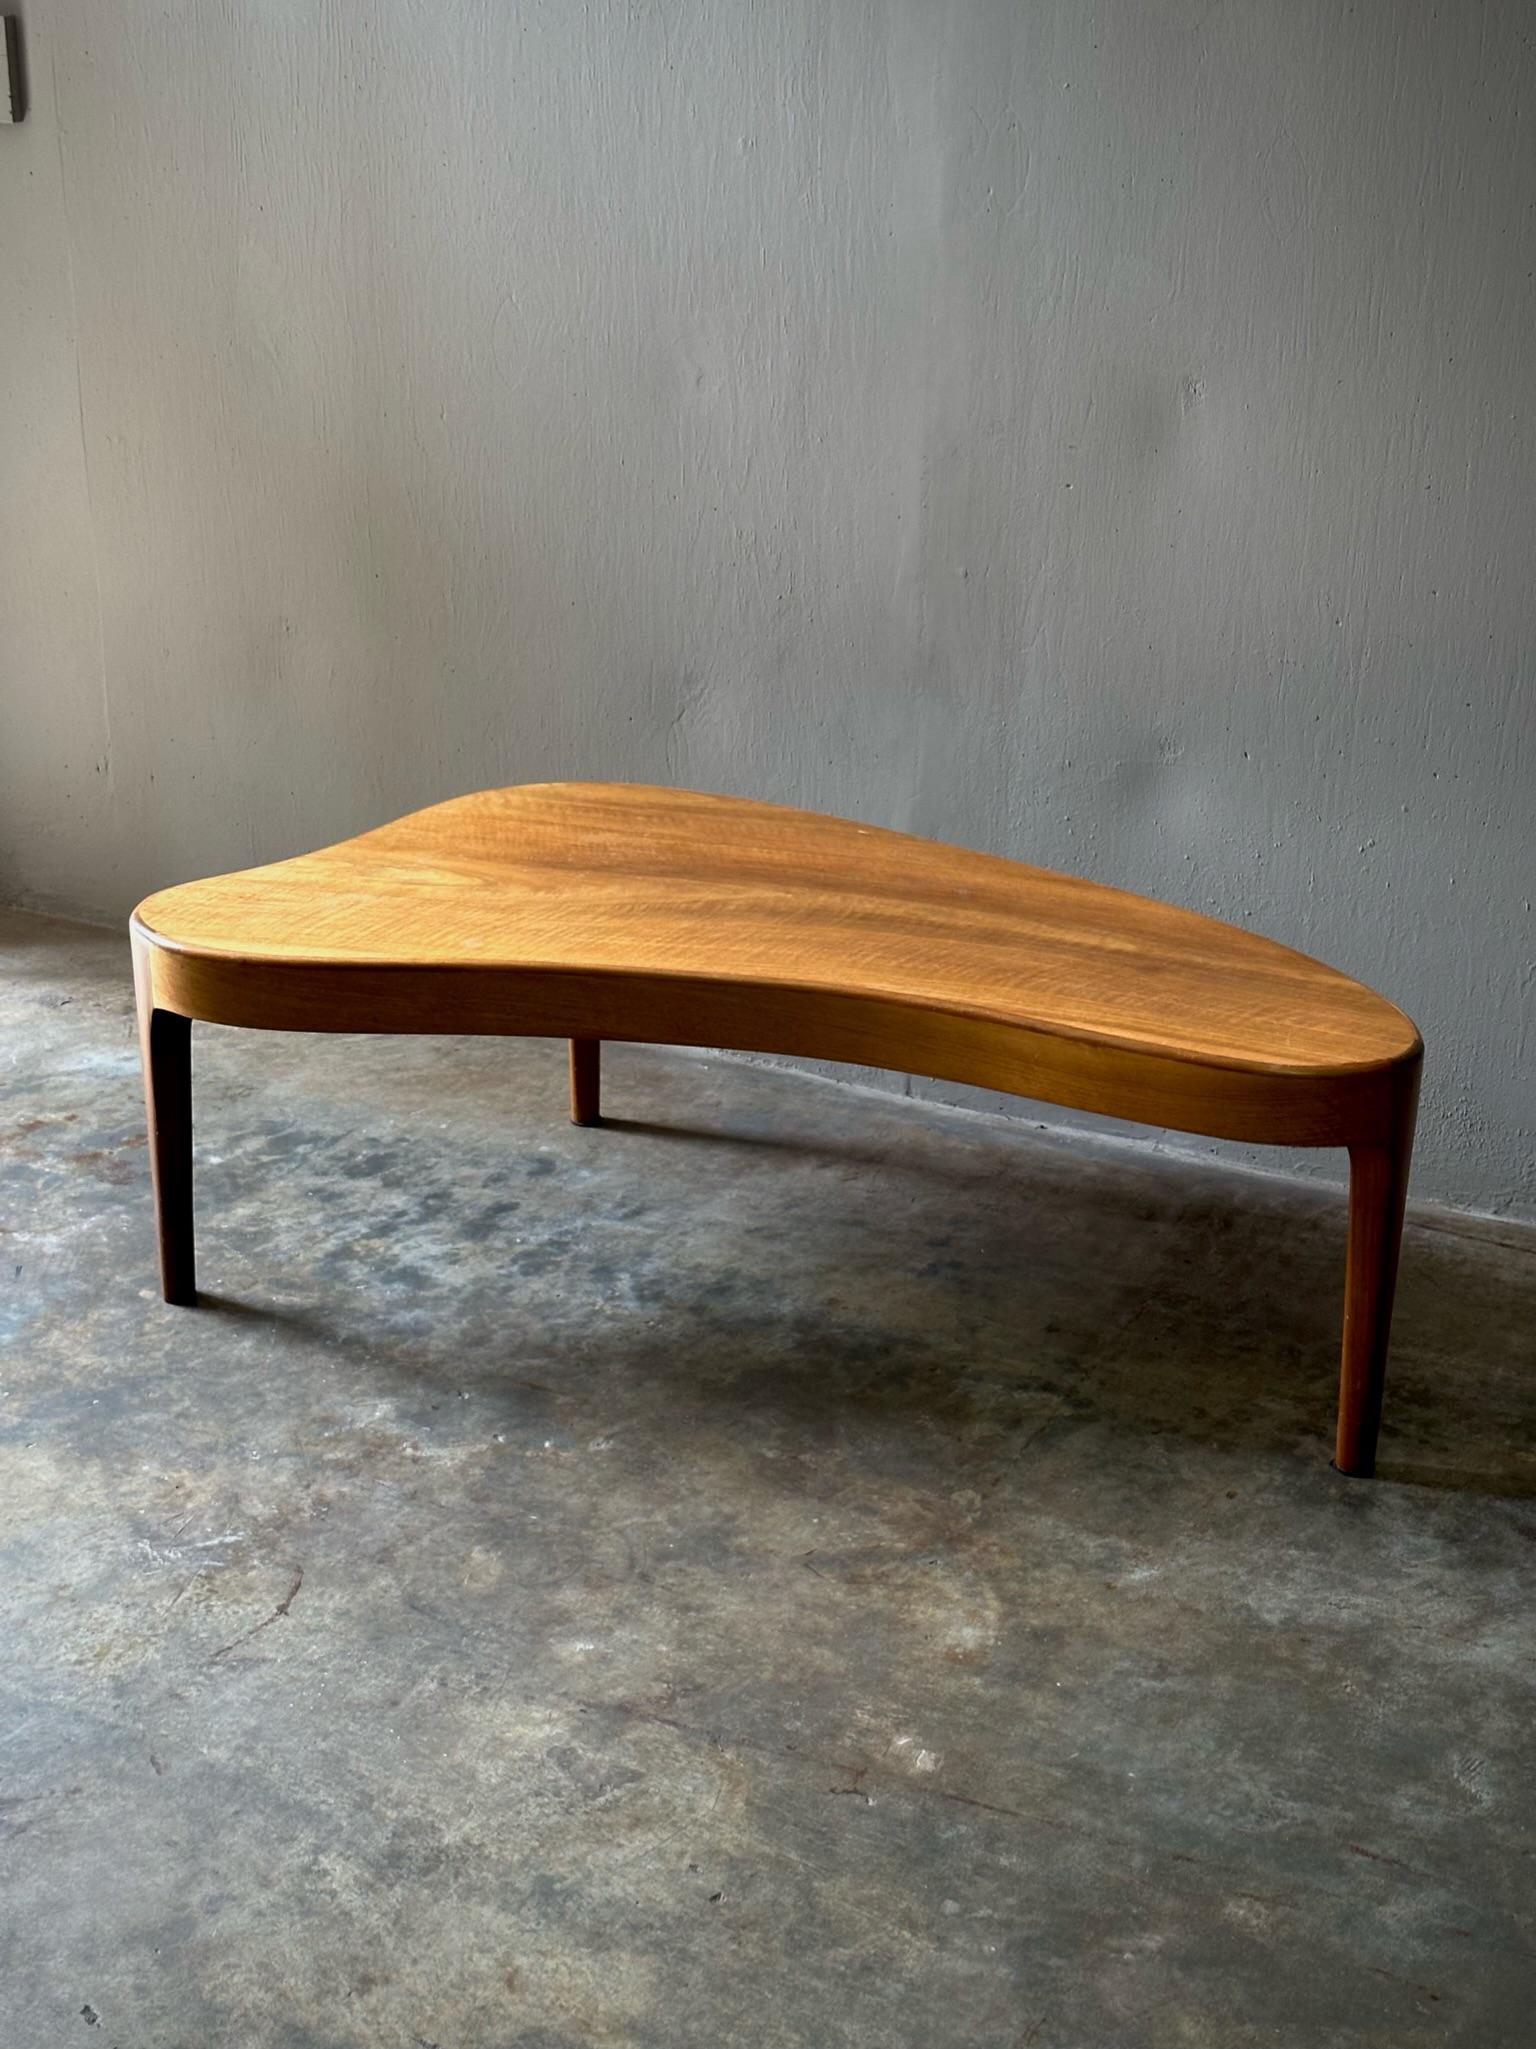 Danish Mid-Century Modern Elliptical Coffee Table In Good Condition For Sale In Los Angeles, CA